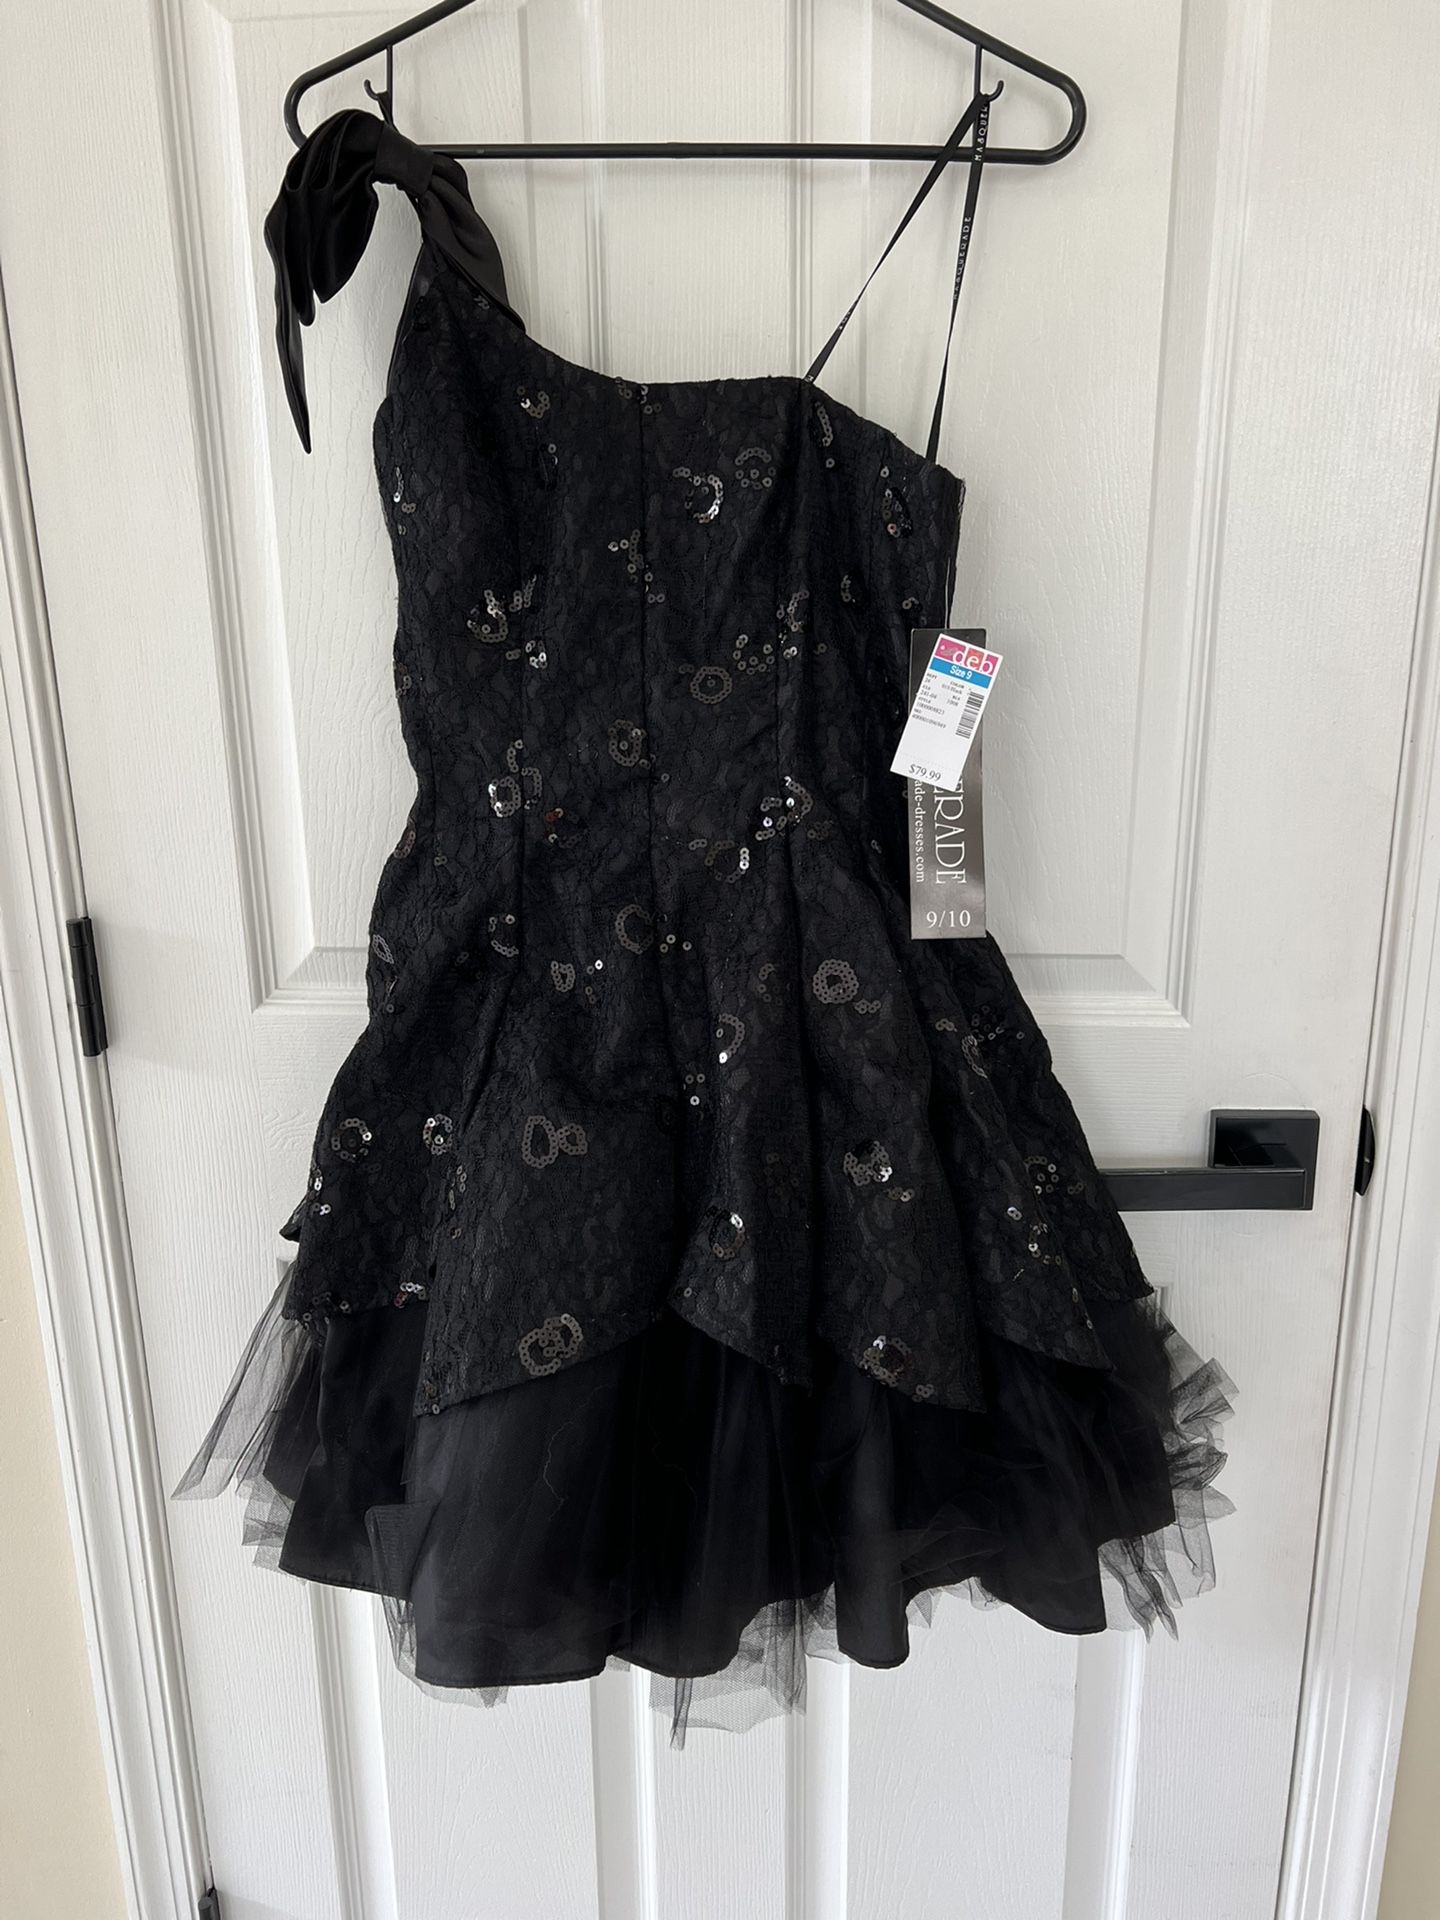 New with tags absolutely gorgeous short black fluffy dress